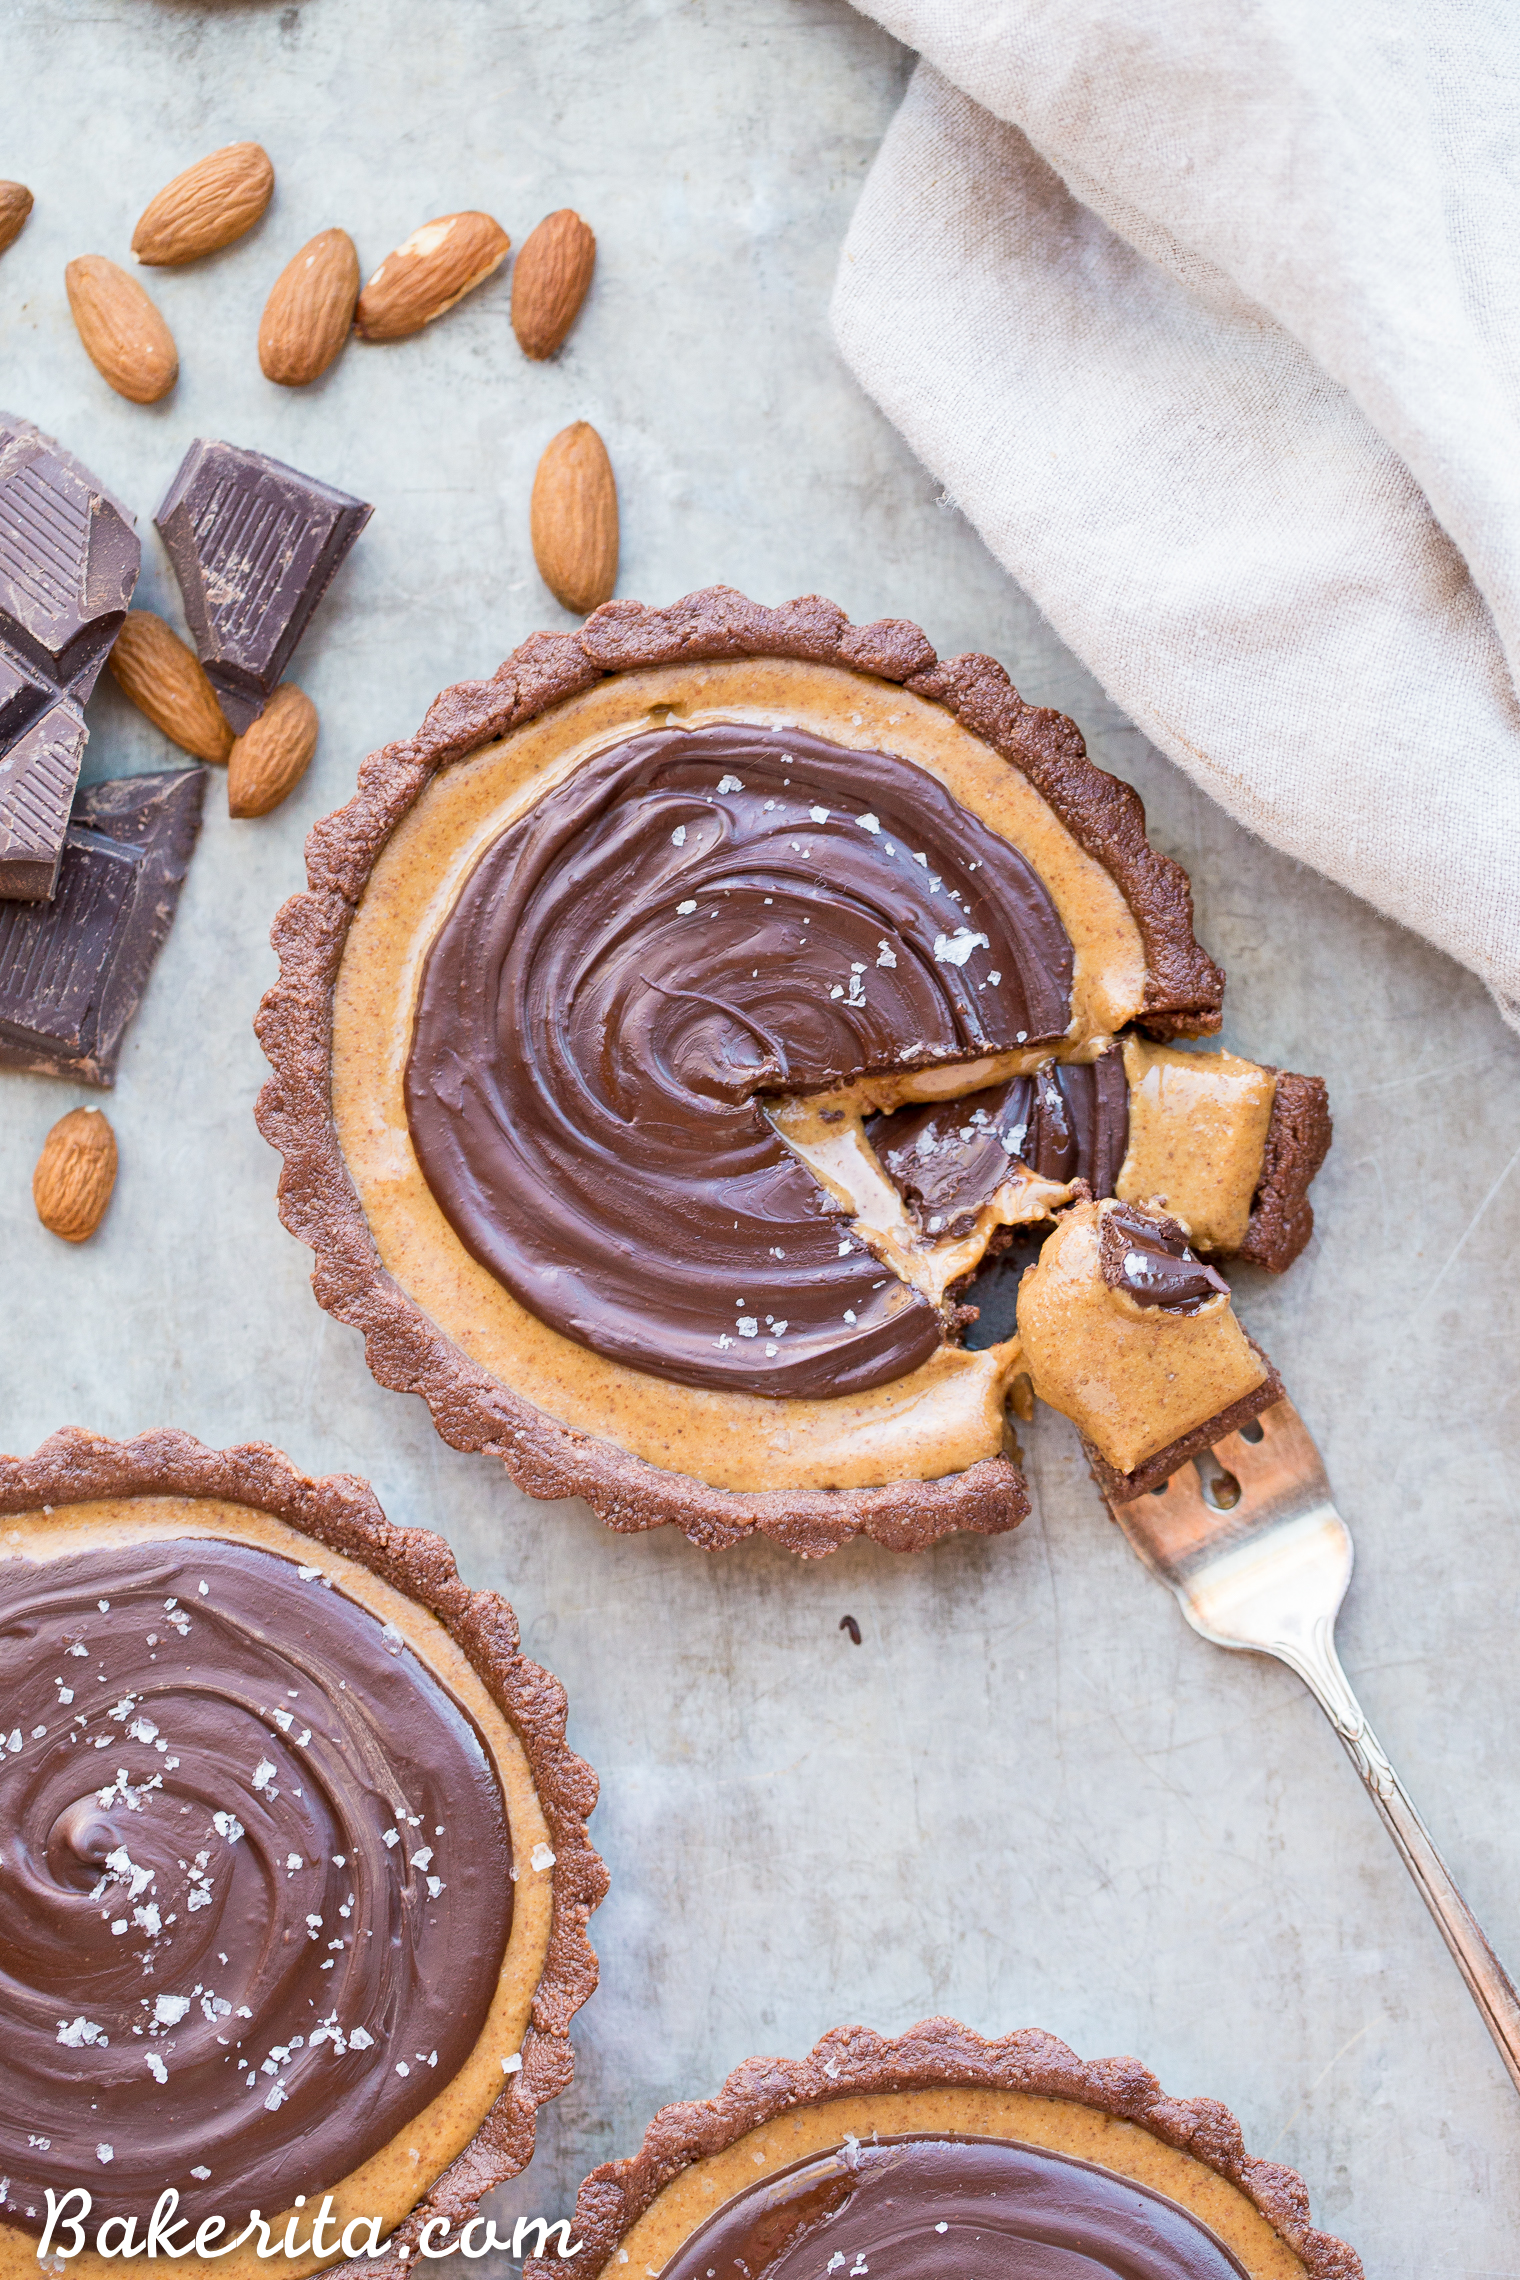 This No Bake Chocolate Almond Butter Tart tastes like a giant almond butter cup! There's no baking required and it's gluten-free, paleo, and vegan. You'll adore this melt in your mouth tart.